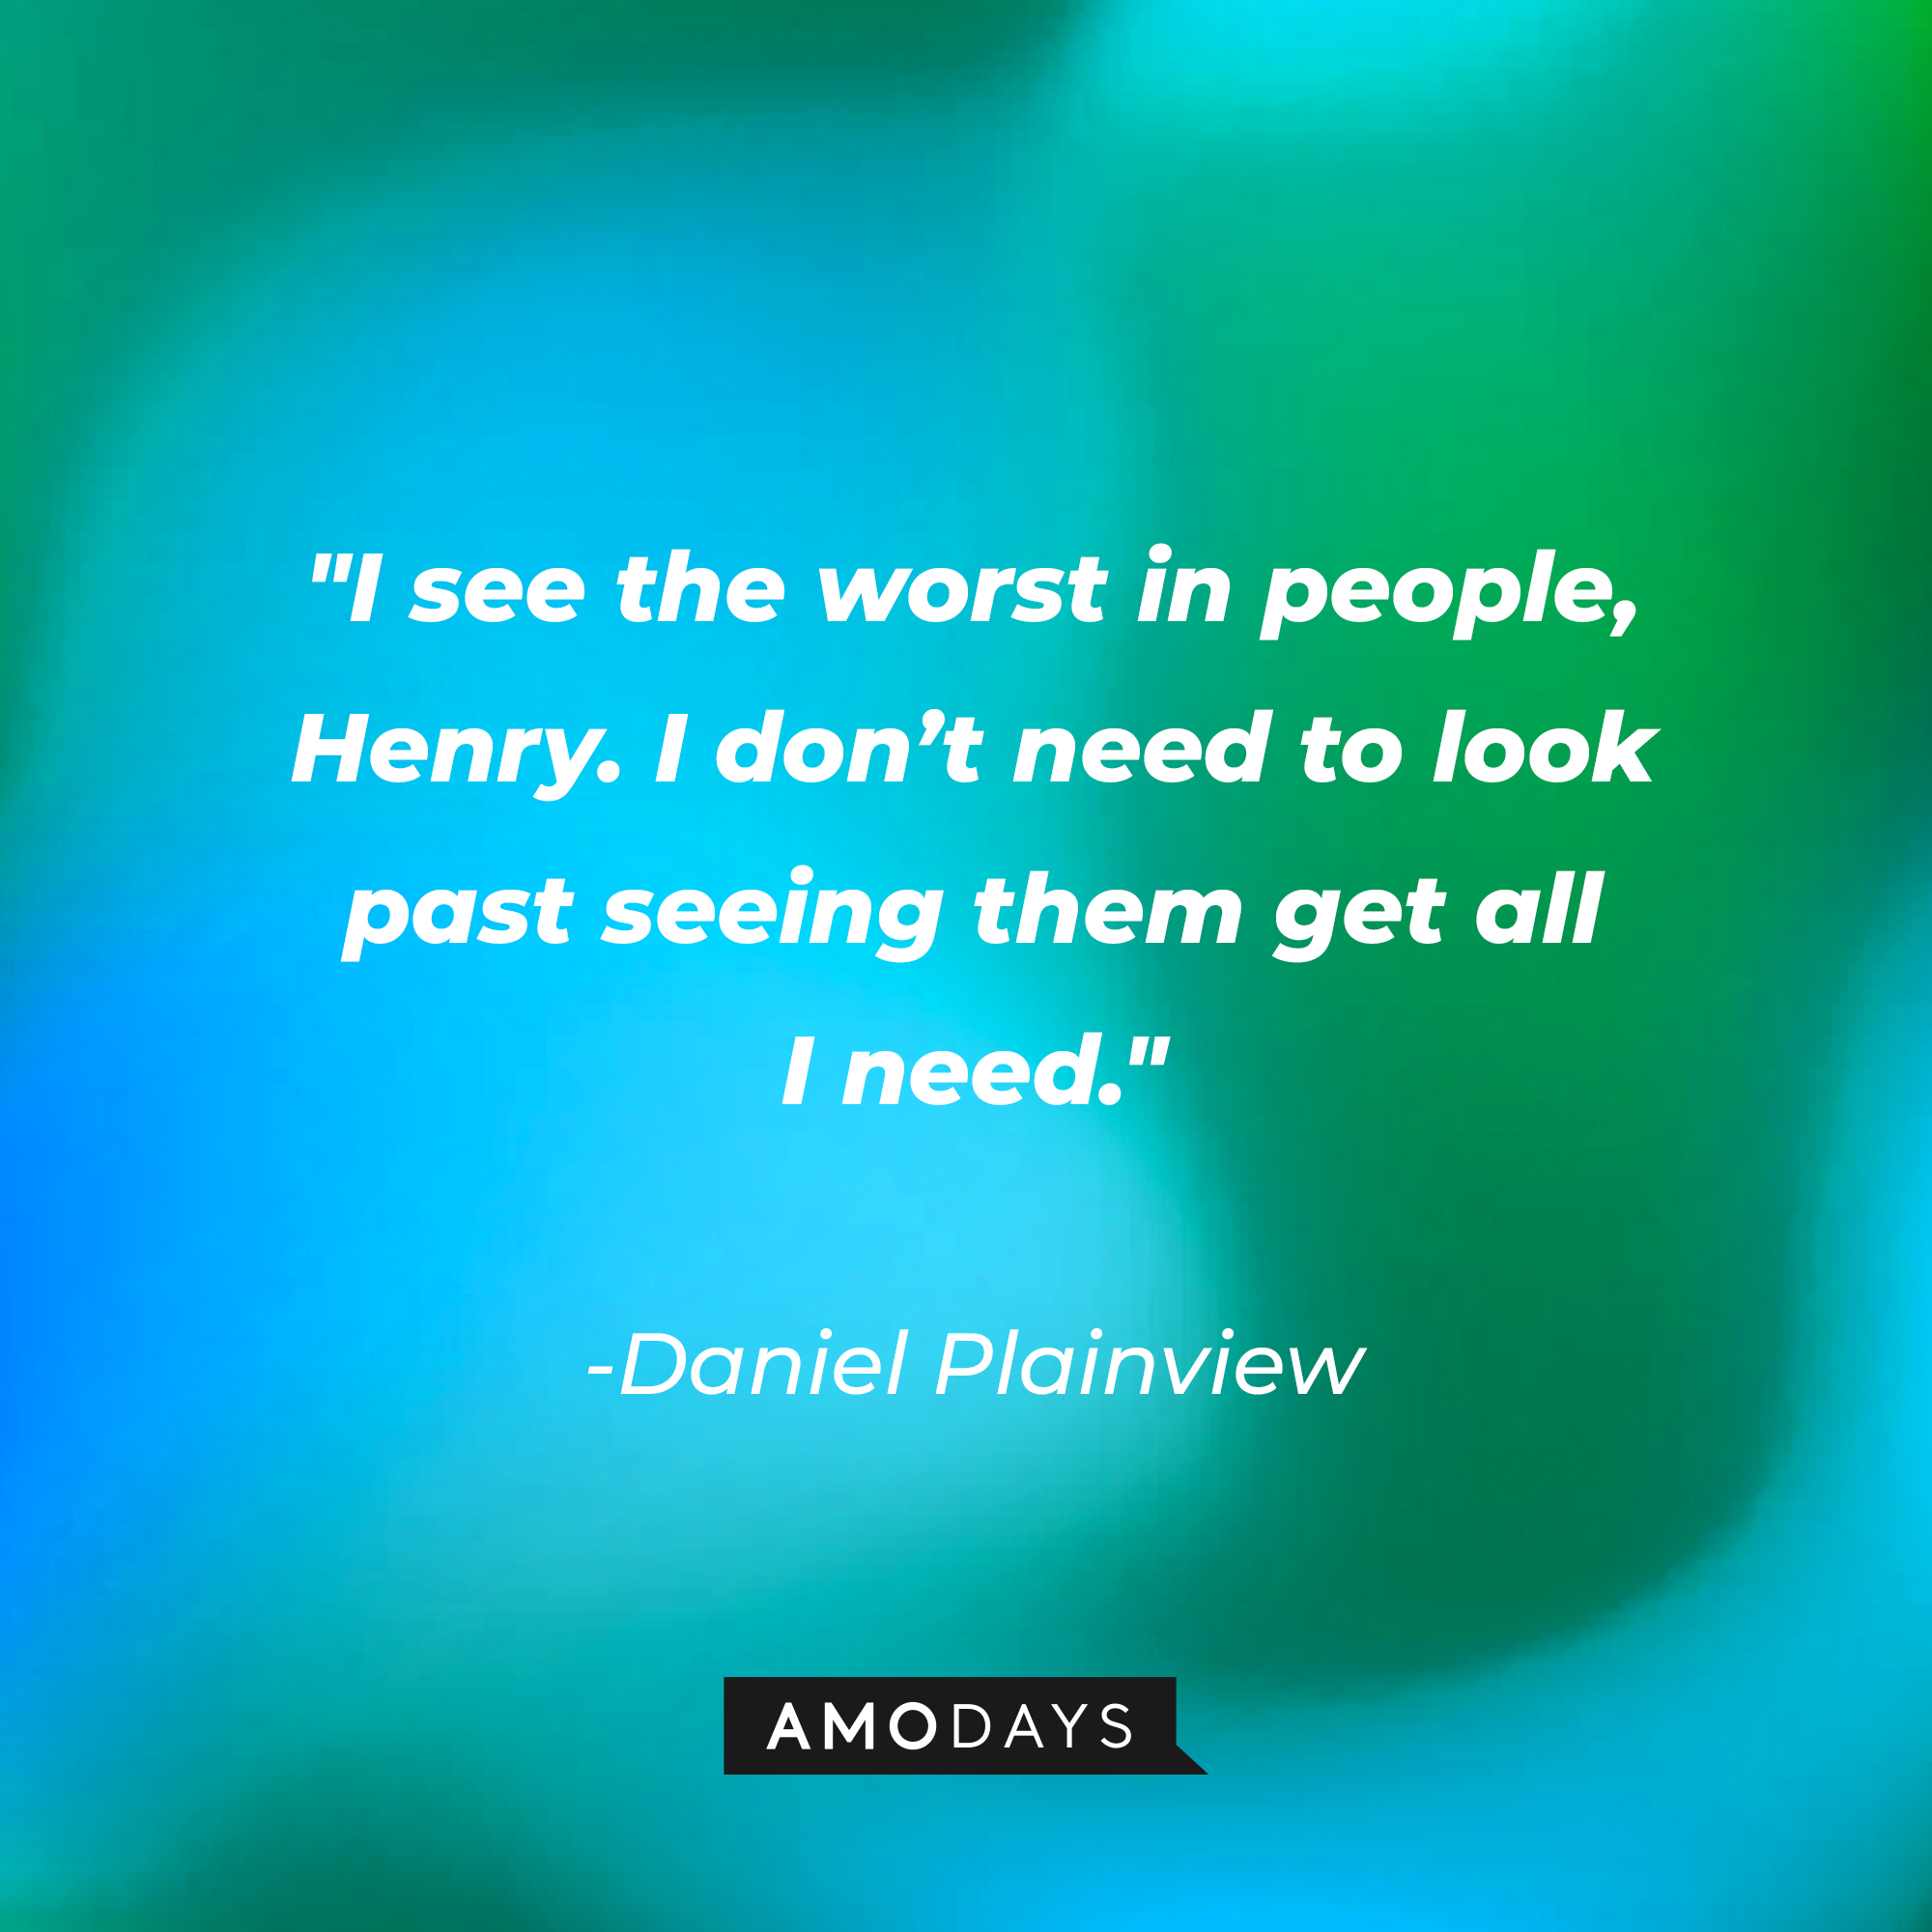 Daniel Plainview’s quote: “I see the worst in people, Henry. I don’t need to look past seeing them get all I need.” | Source: AmoDays